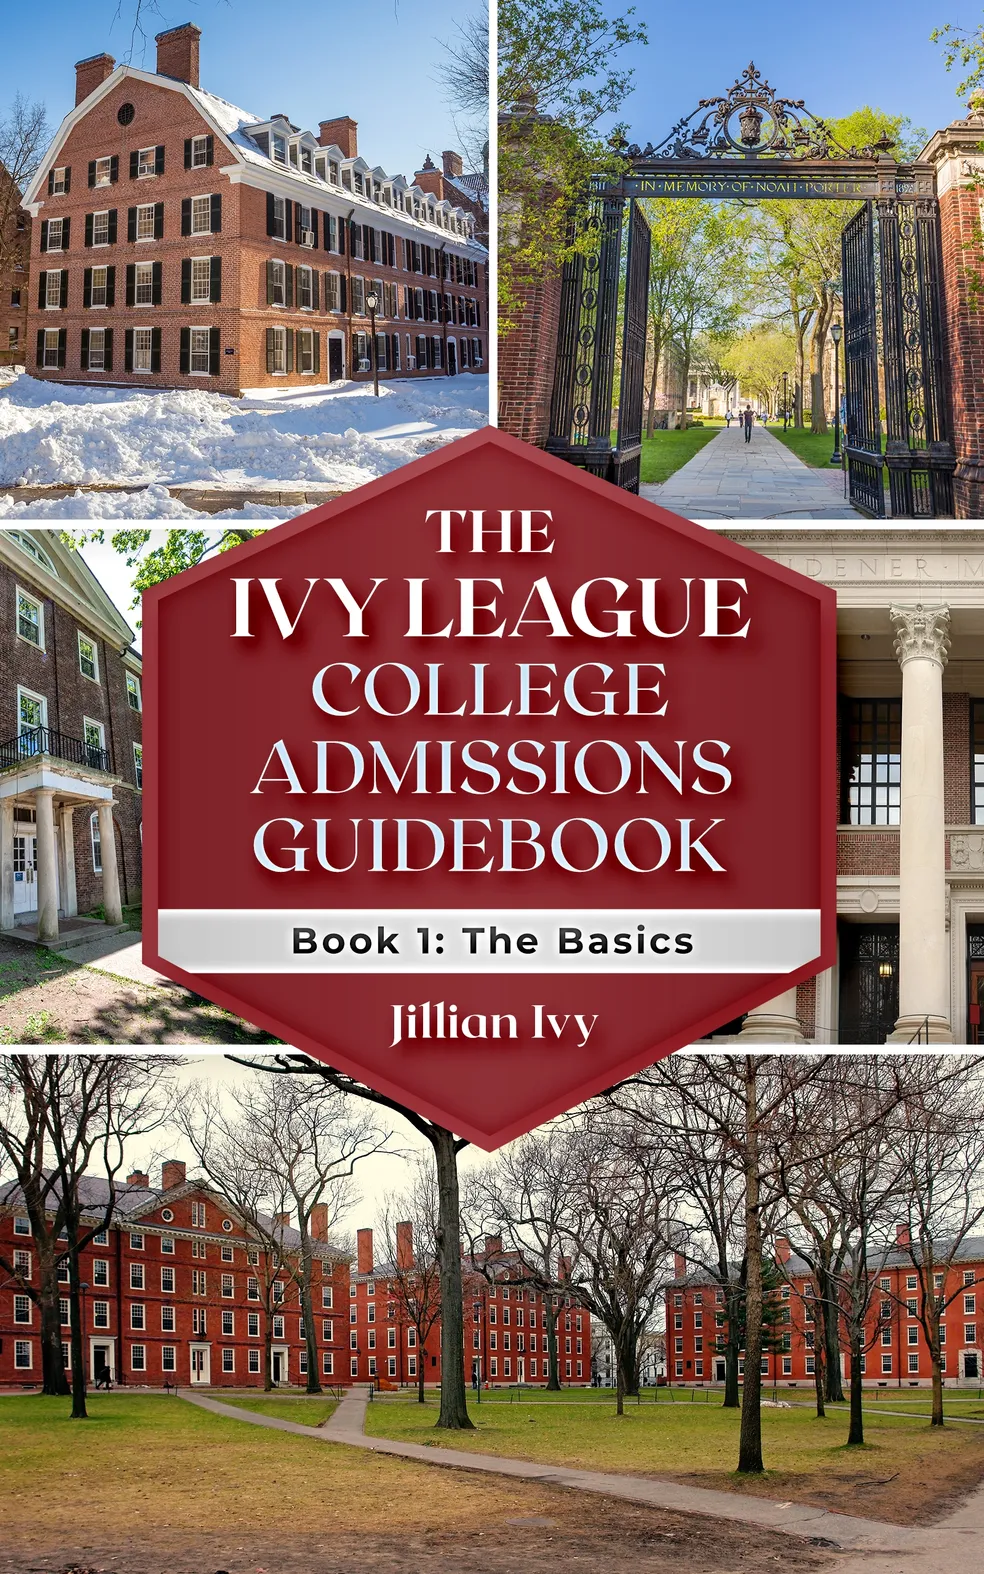 Ivy League College Admissions Guidebook